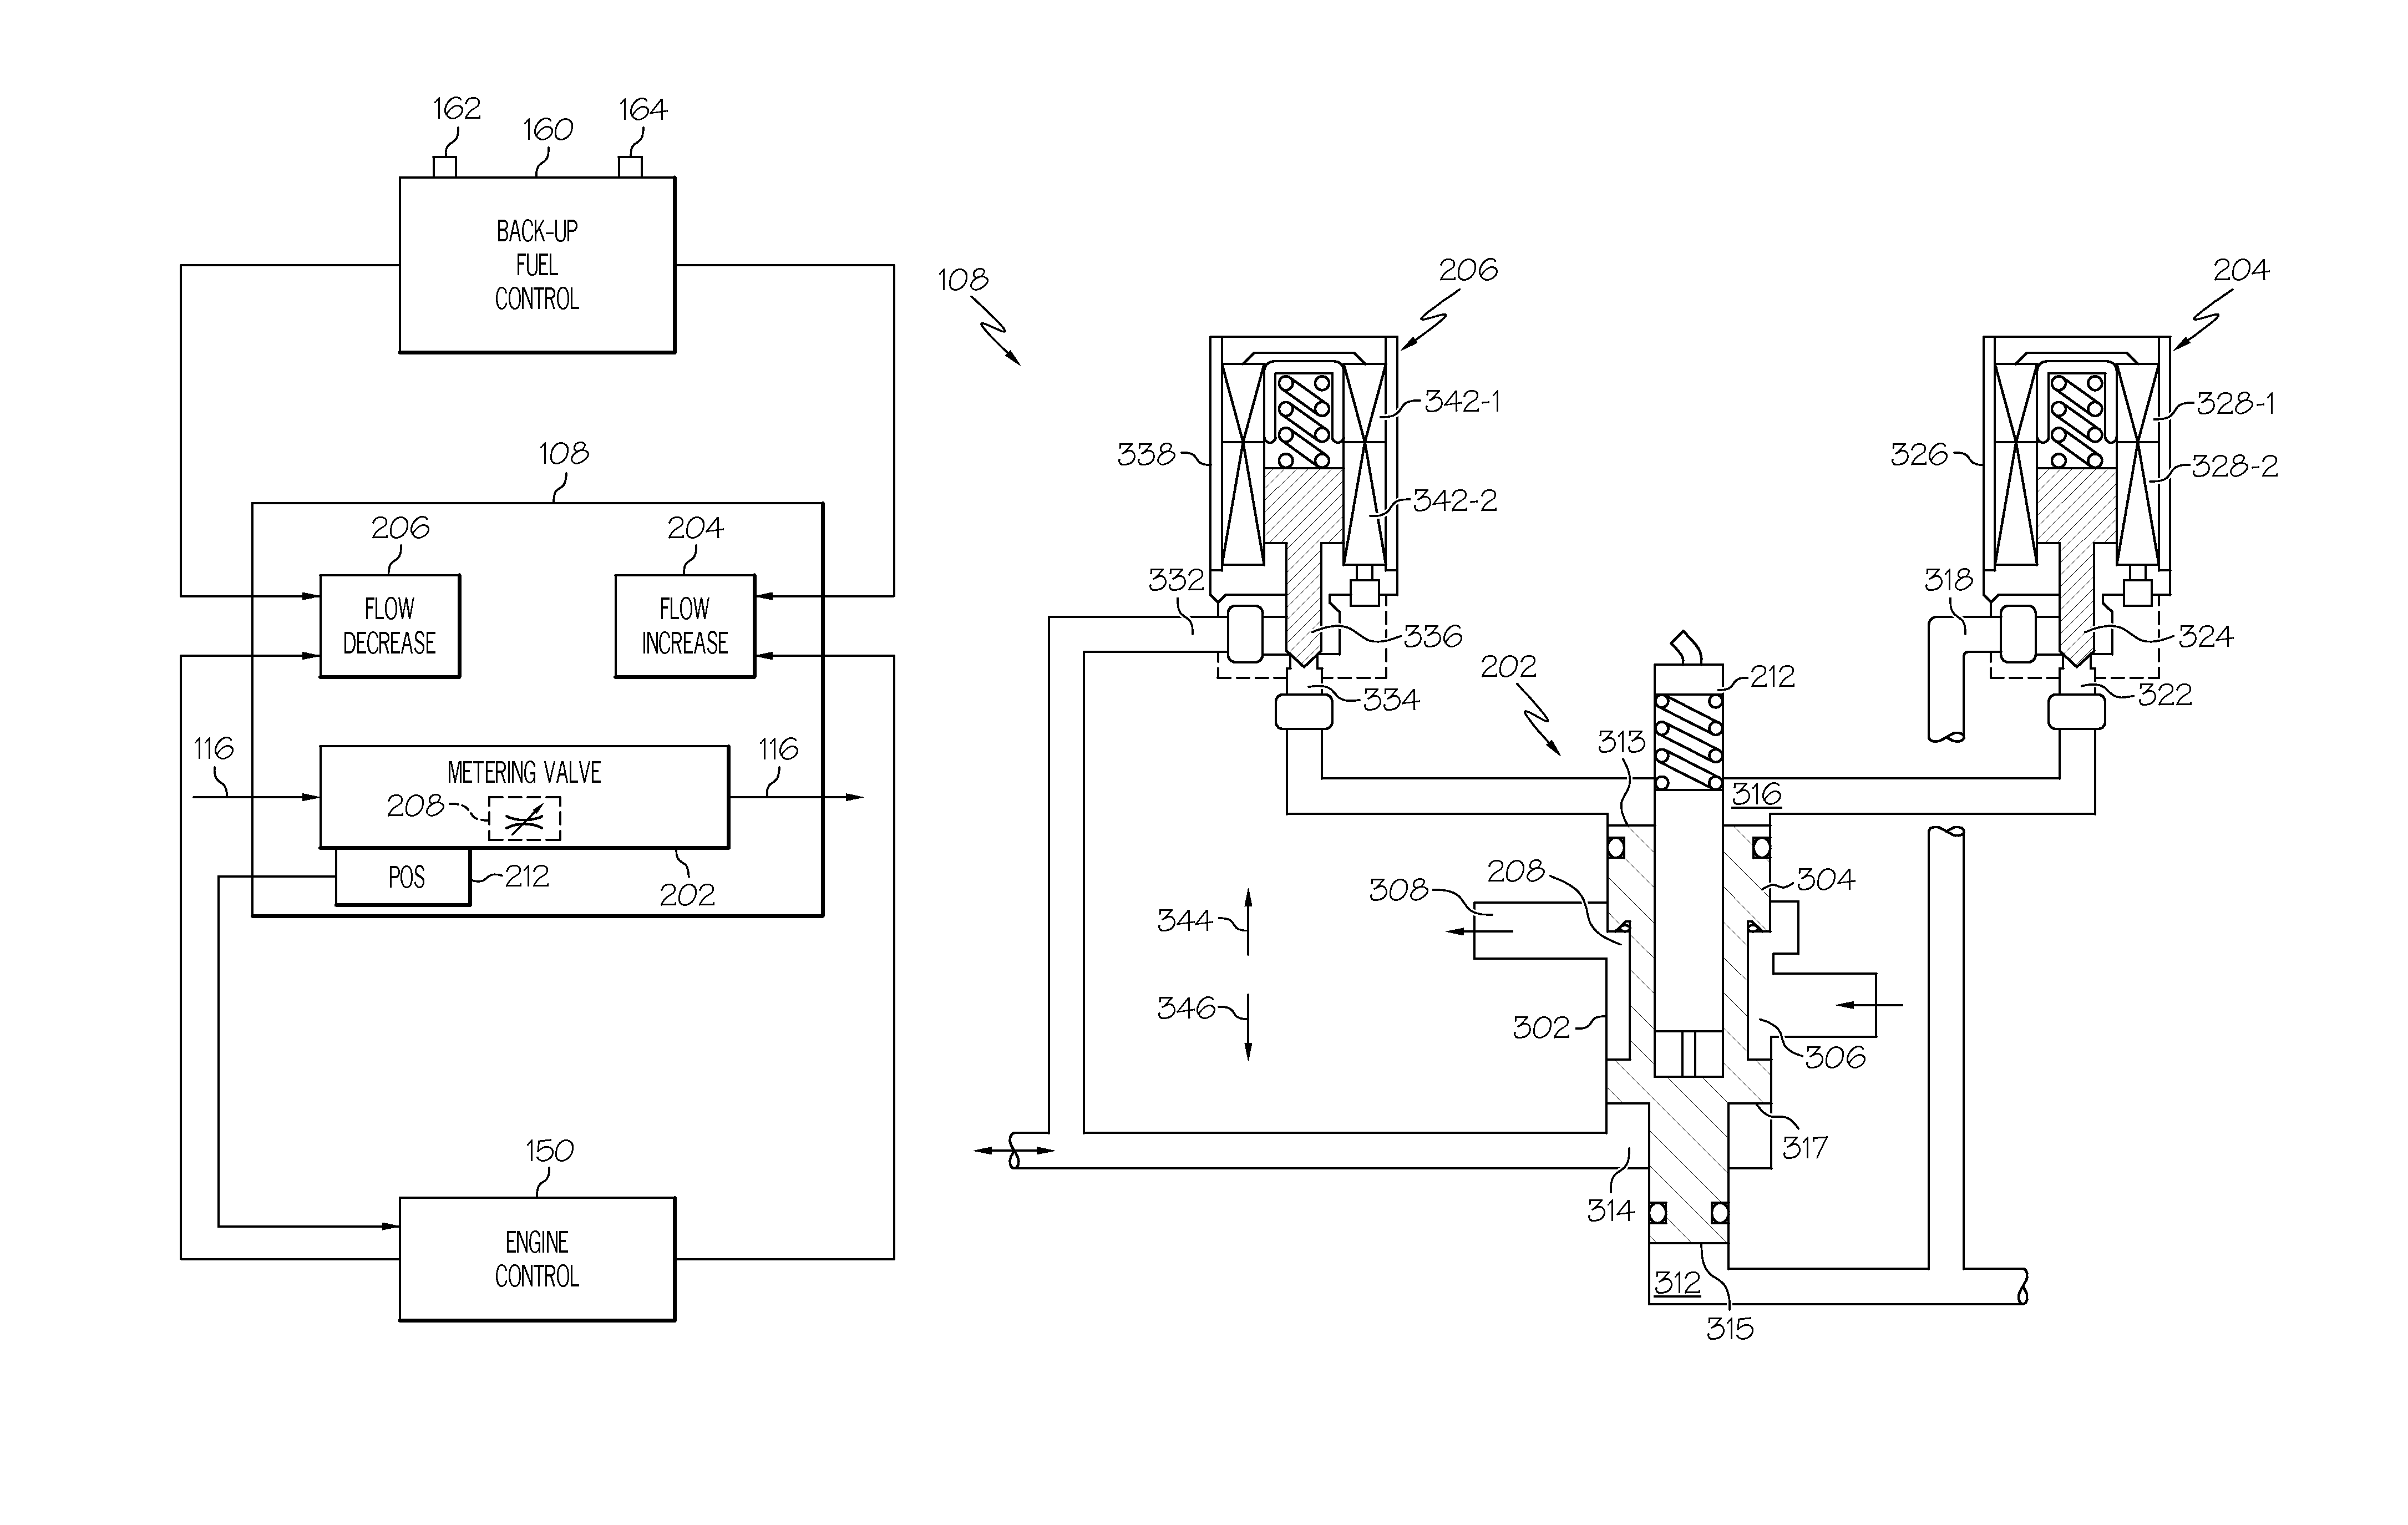 Gas turbine engine fuel metering valve adapted to selectively receive fuel flow increase/decrease commands from the engine control and from the back-up fuel control